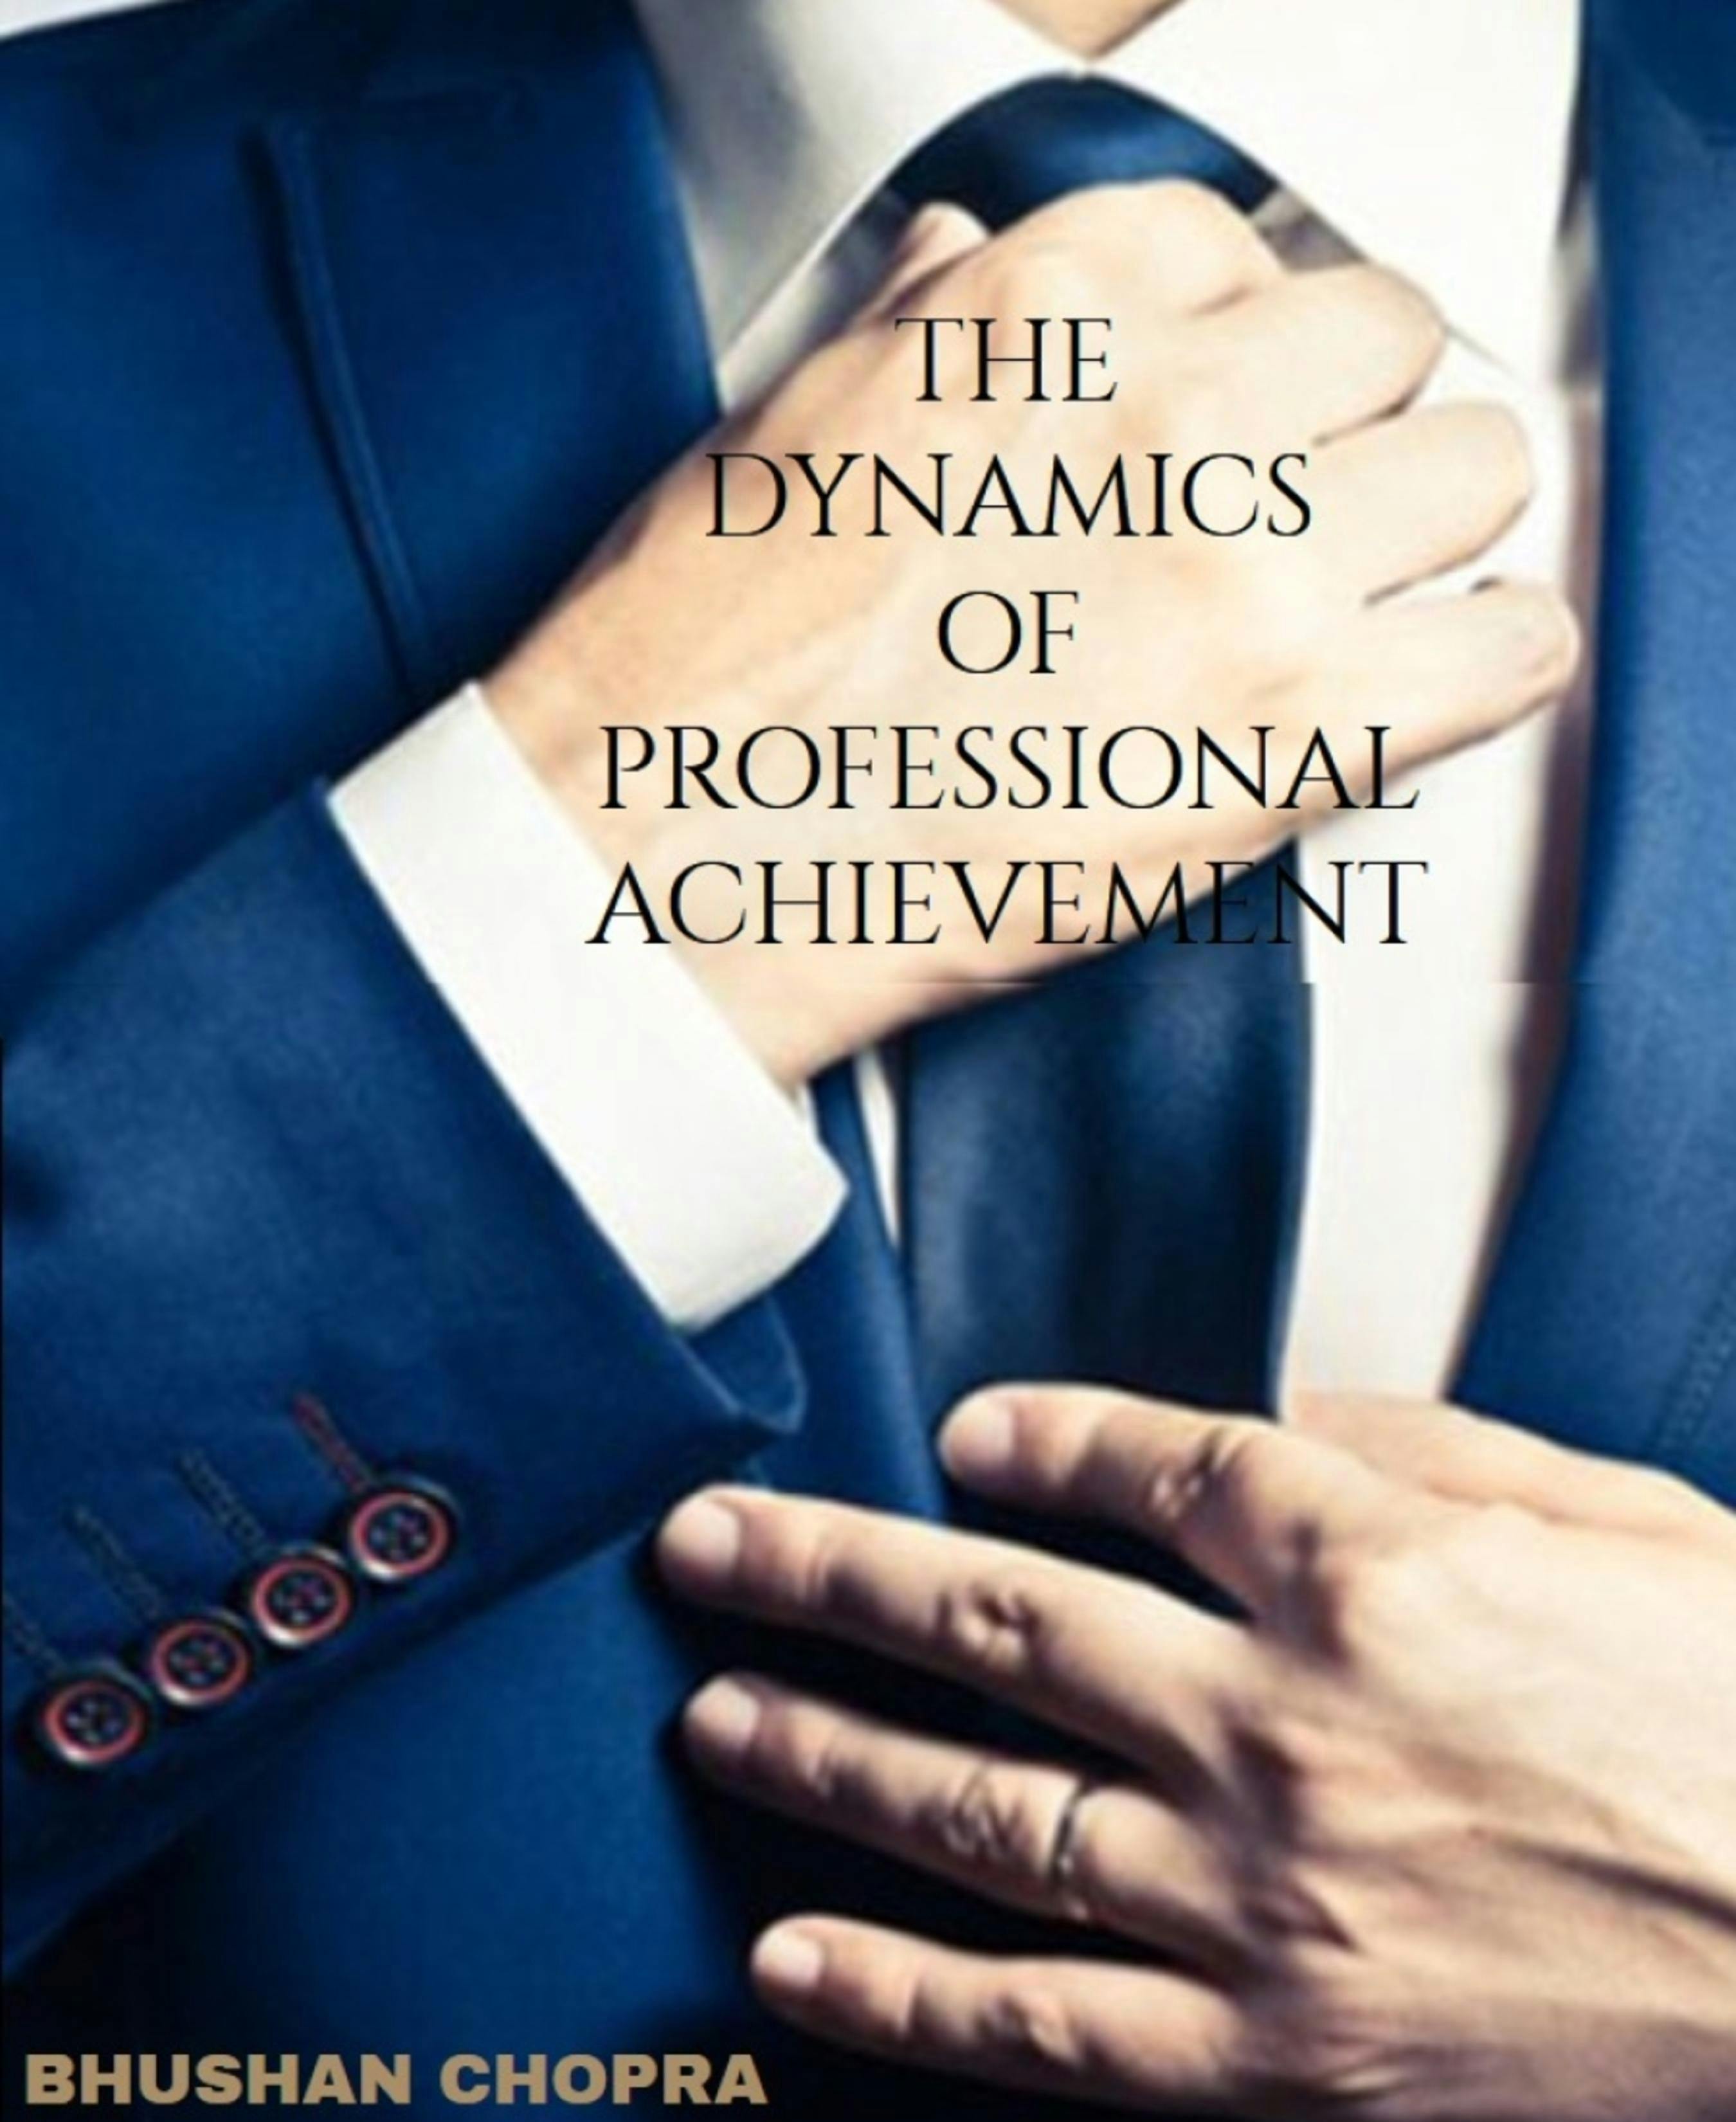 THE DYNAMICS OF PROFESSIONAL ACHIEVEMENT: Strategies and skills to unlock your potential in your professional career - Bhushan Chopra